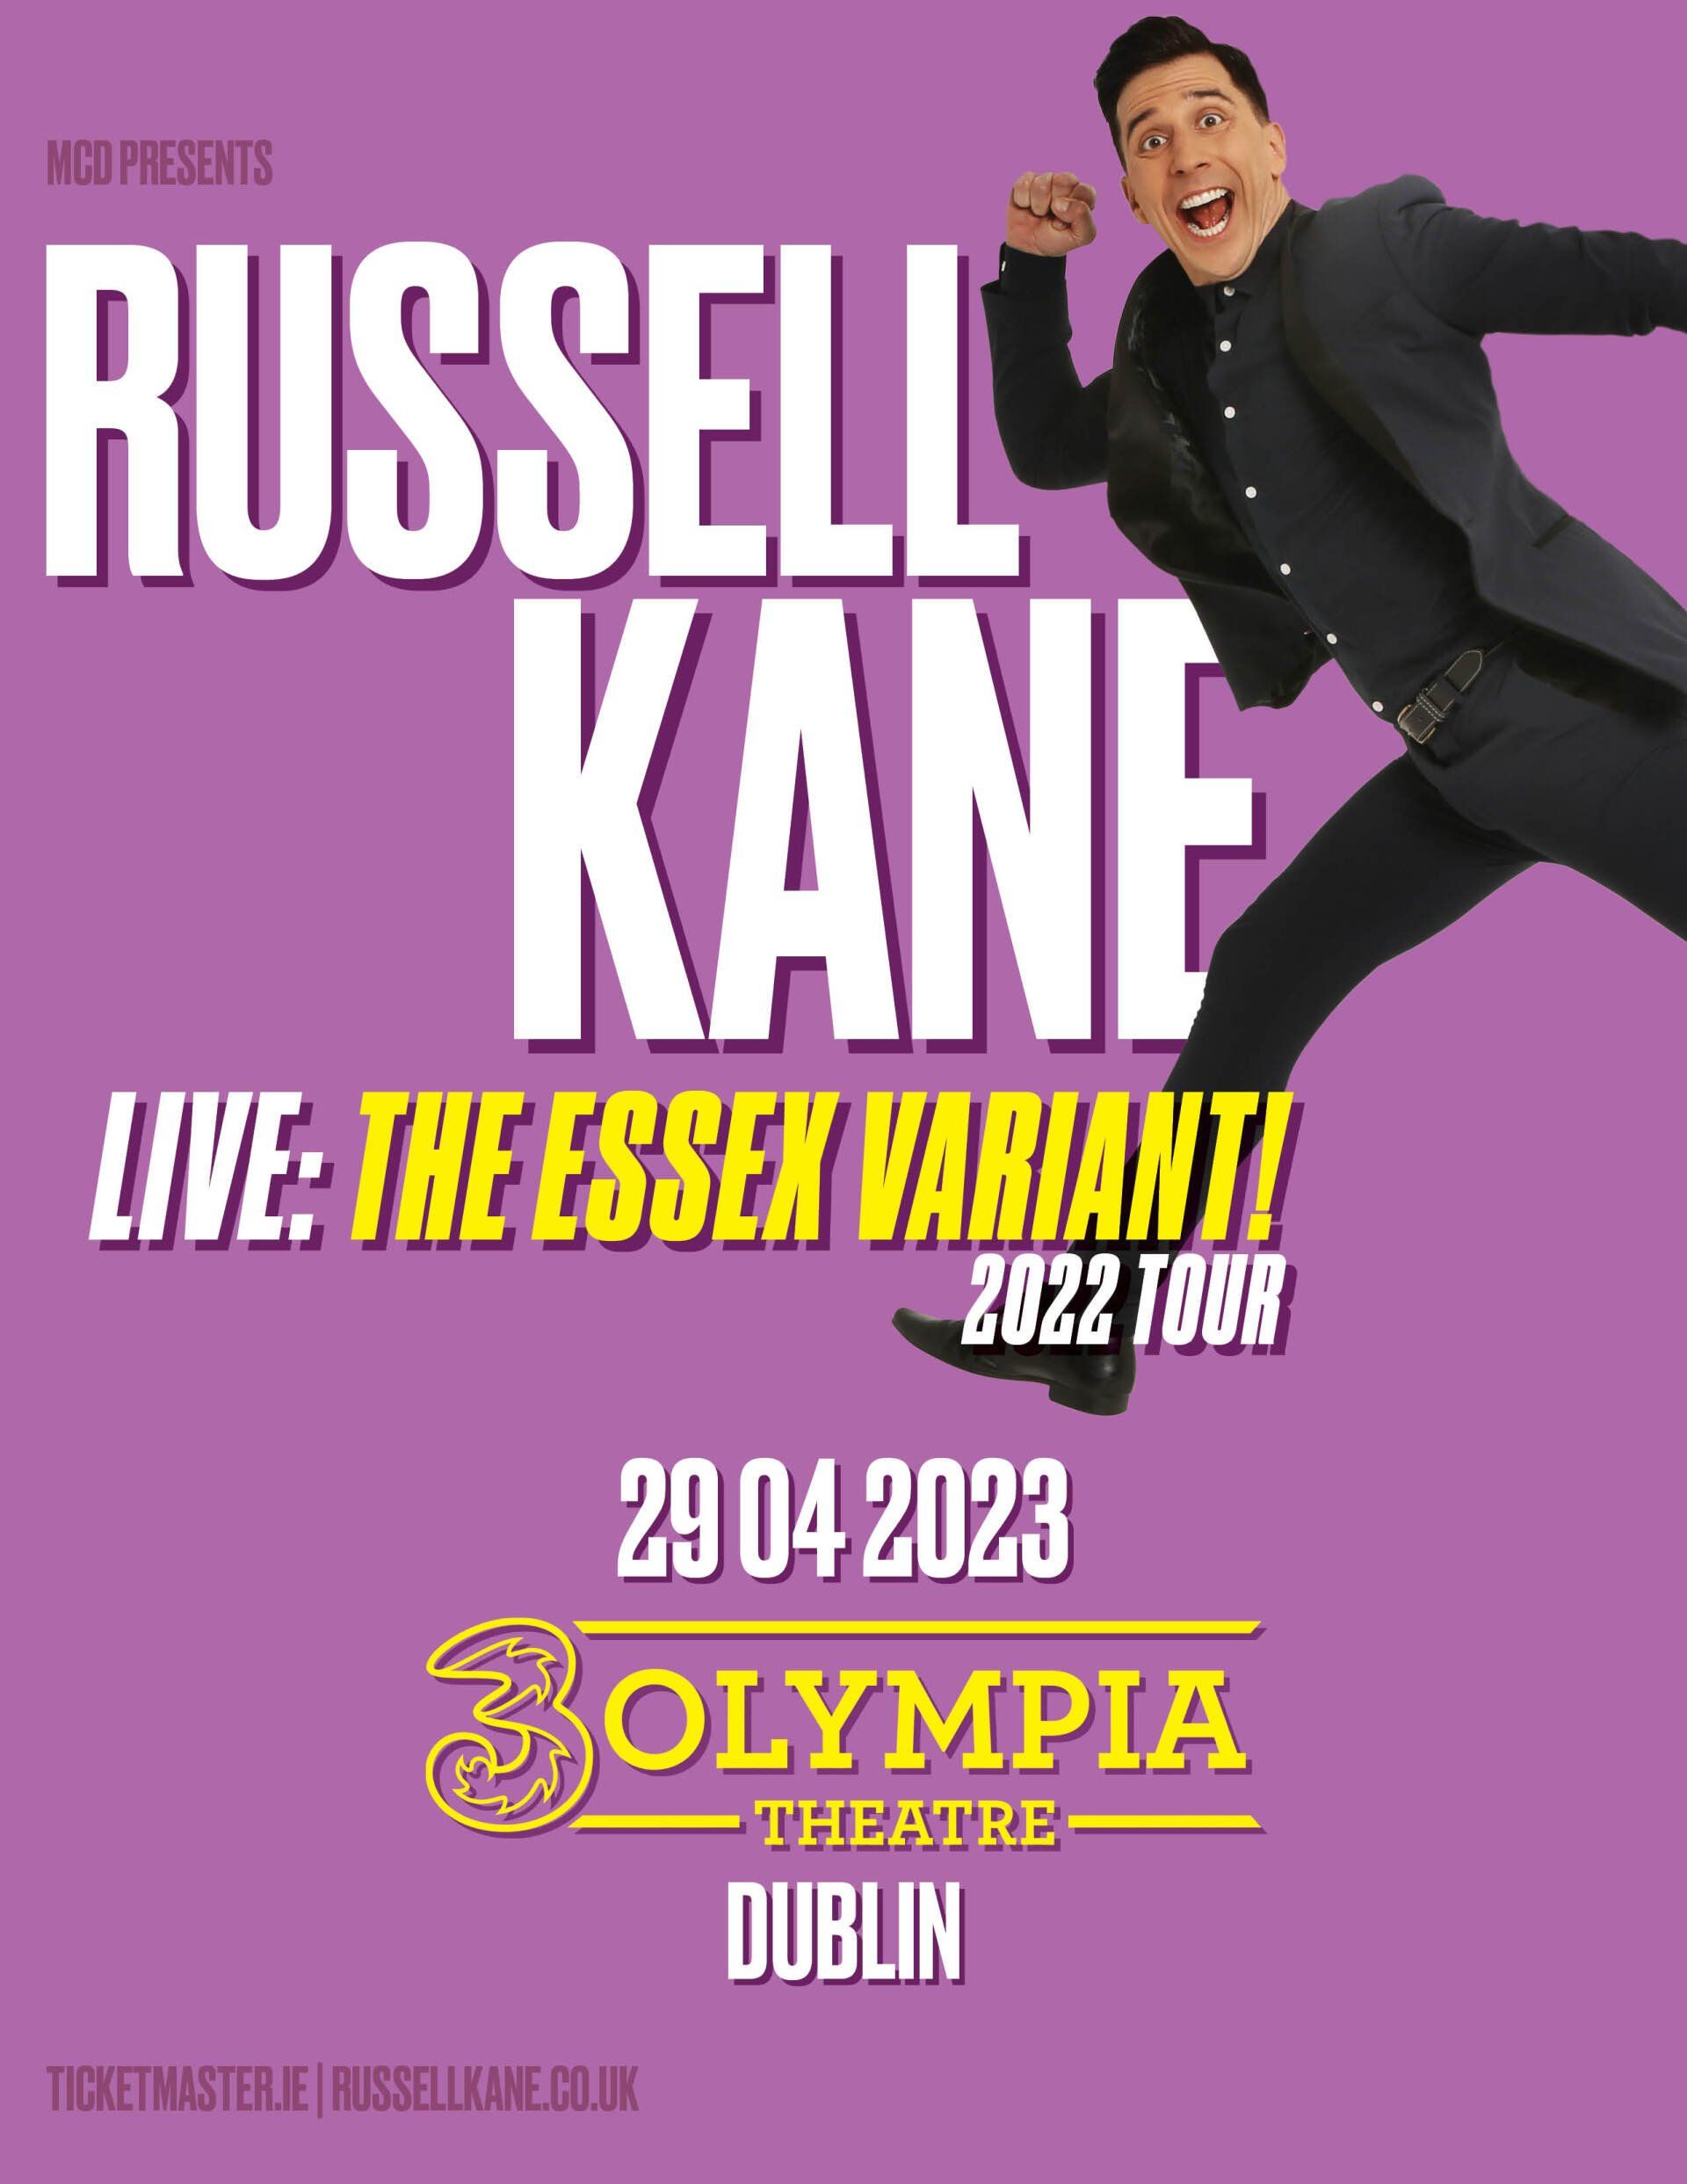 Russell Kane Live:  The Essex Variant!  COMING TO THE 3OLYMPIA THEATRE DUBLIN